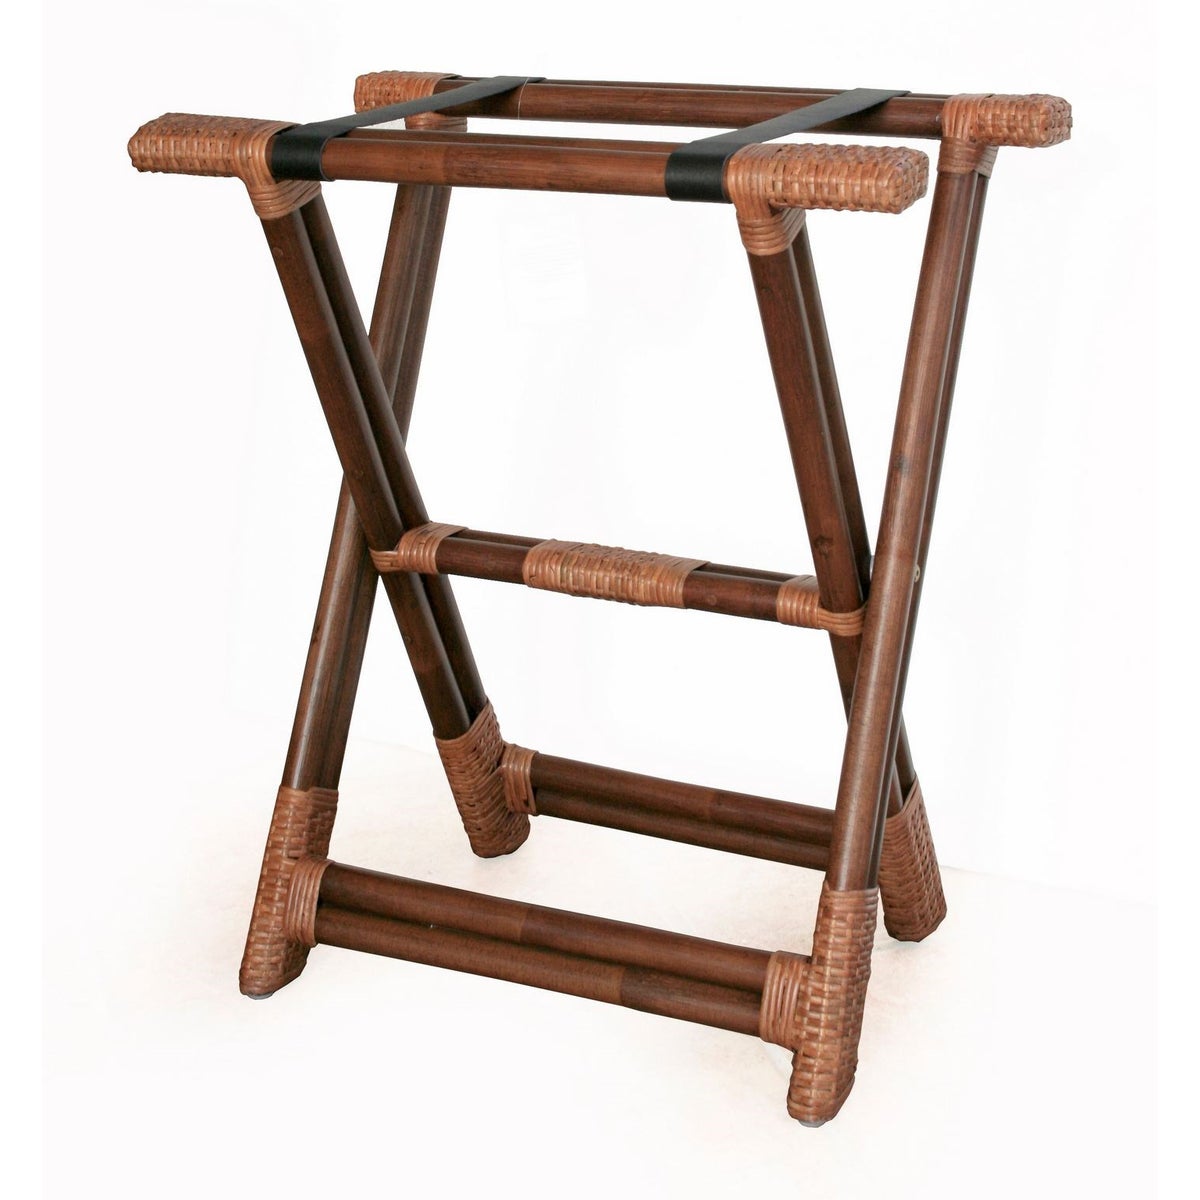 Malibu Luggage Stand Frame Color - Cocoa  Leather Color - BlackThis Item Will Be Discontinued Wh